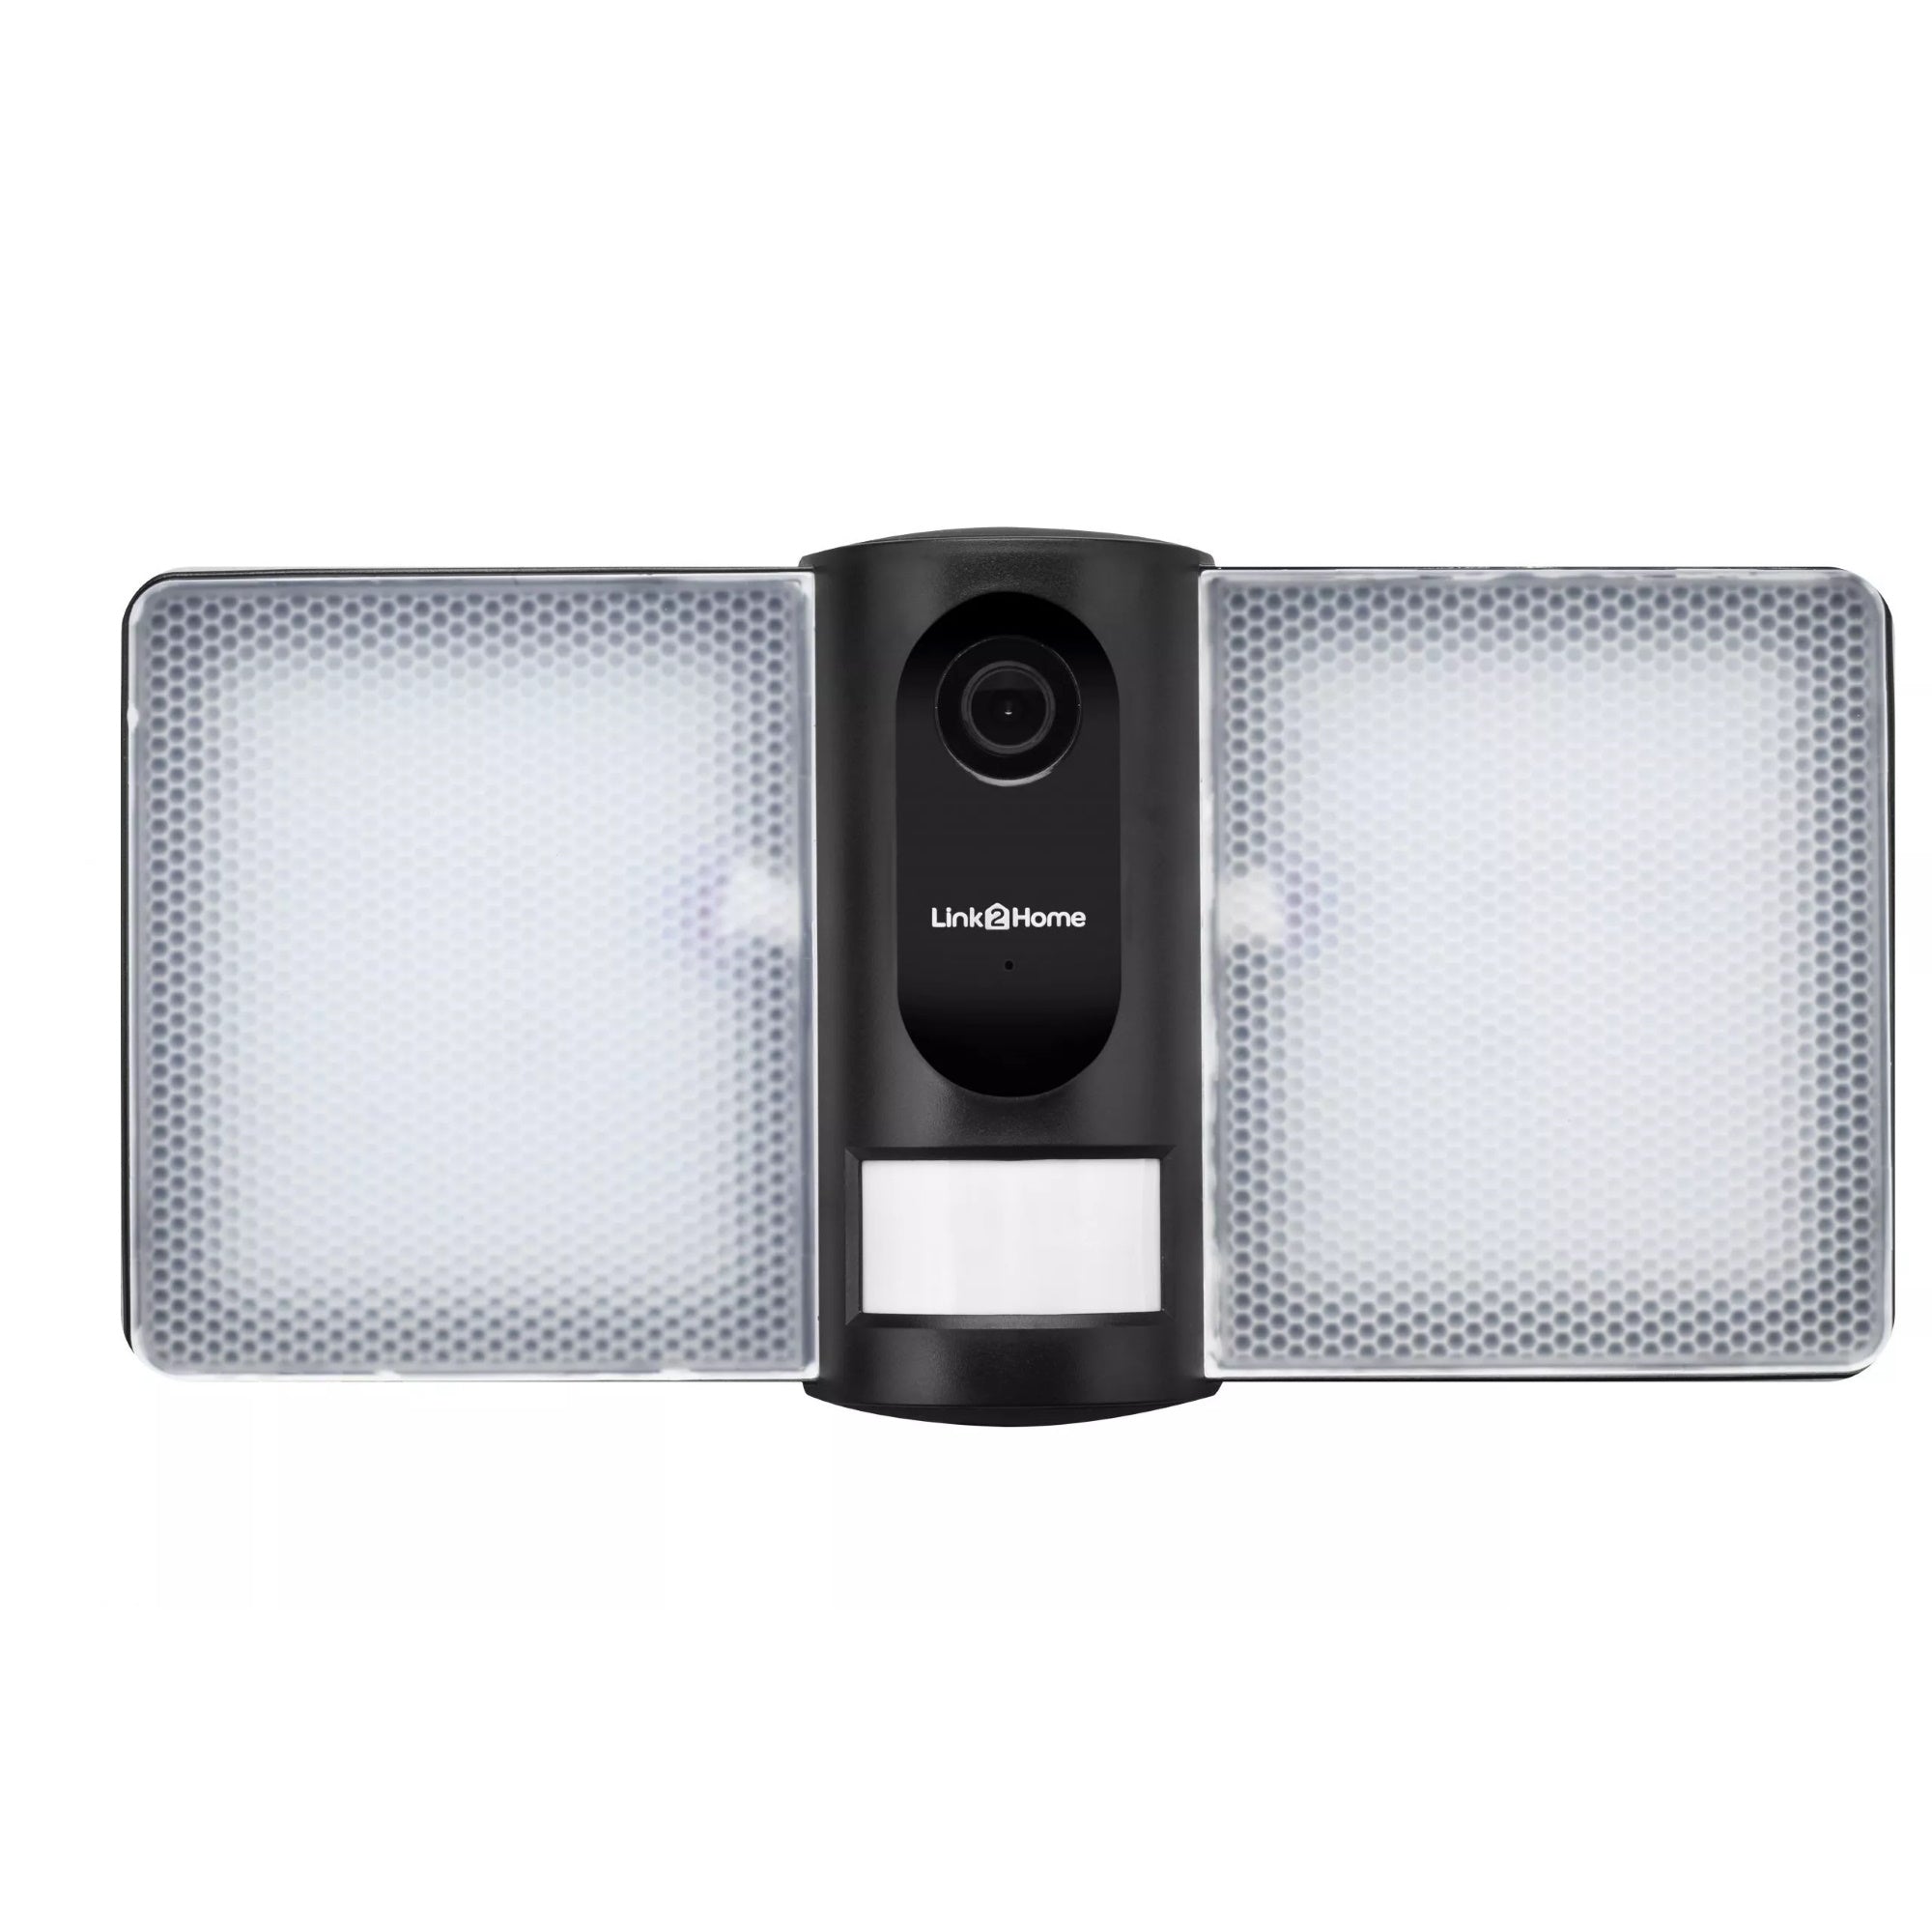 Link2Home L2H-FloodlightCam Smart Outdoor Floodlight Camera - Premium Security from Link2Home - Just $105.00! Shop now at W Hurst & Son (IW) Ltd